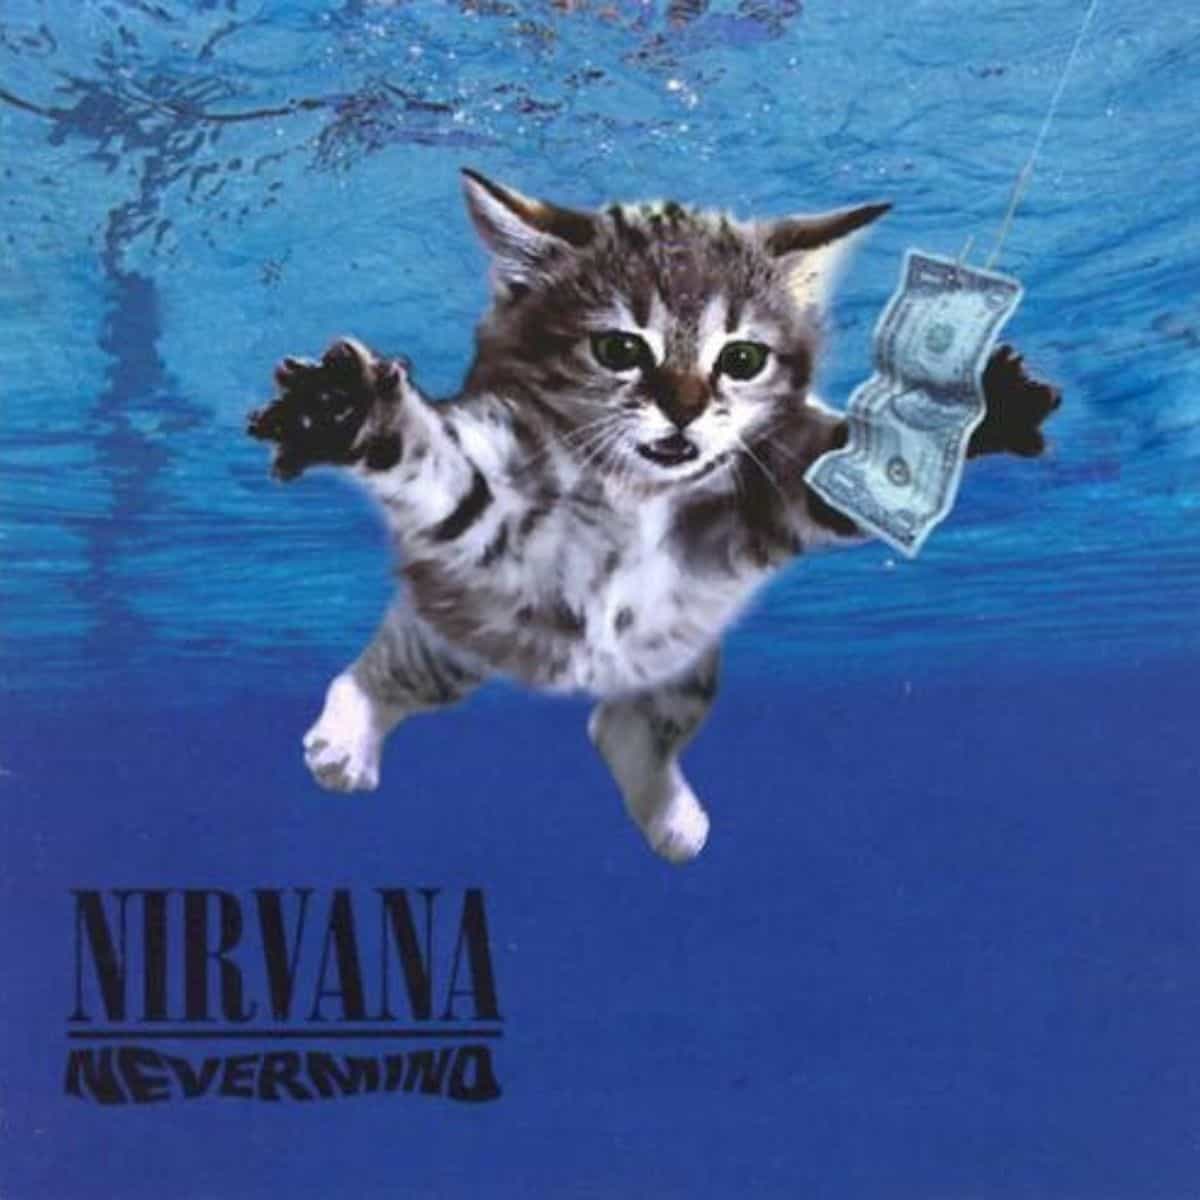 Nevermind cover in cat edition